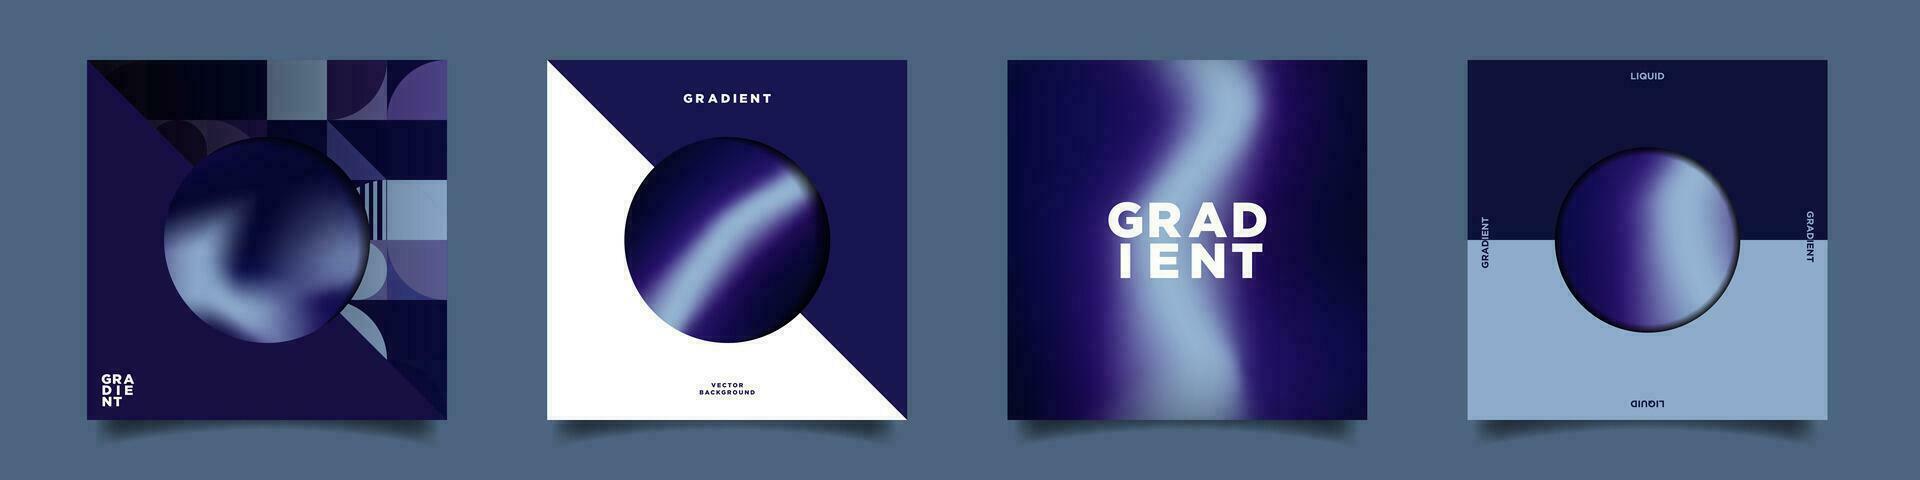 Dark Neon Purple Blue Gradient Abstract Artwork Square Posters. Cyber and neon themed gradients. Editable Vector Backgrounds. For designs, covers, posters, cards, stationary, music. EPS 10.